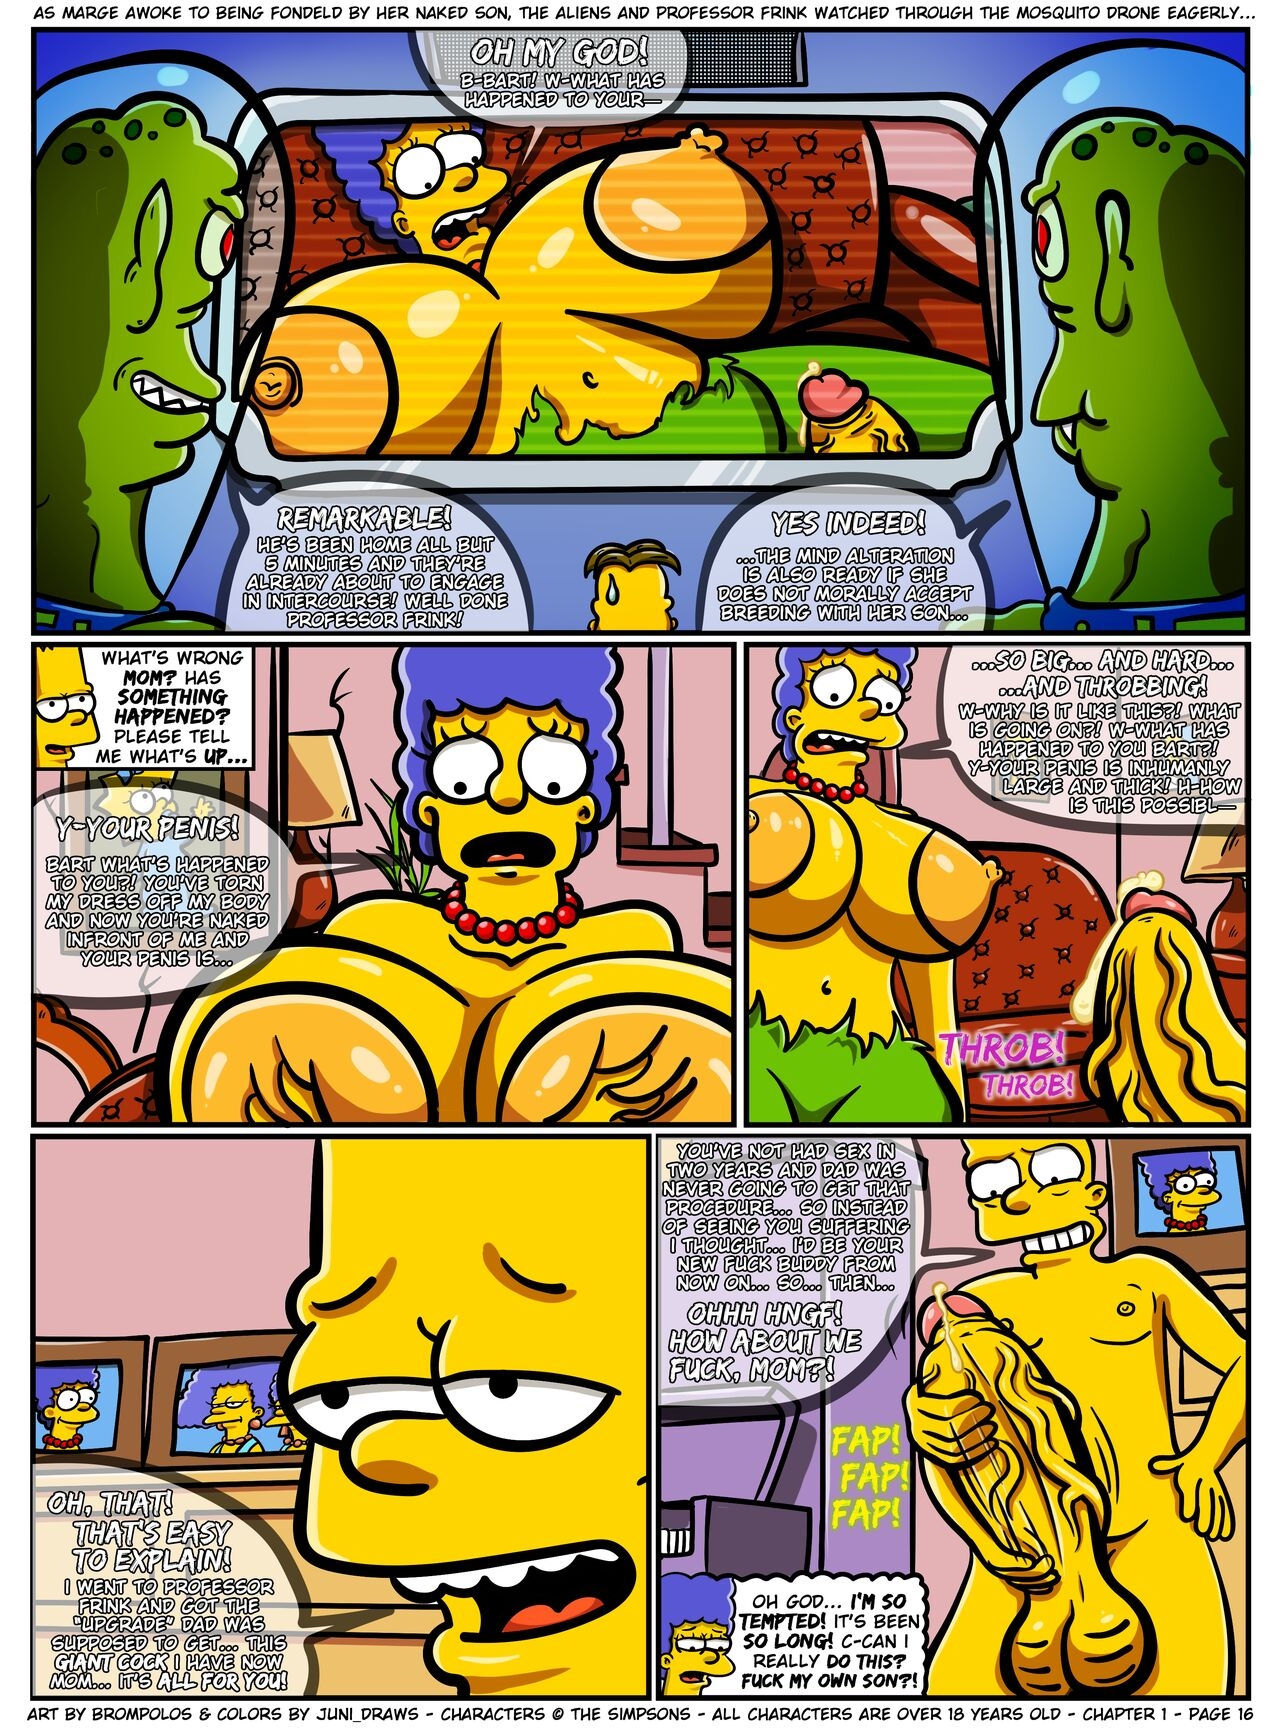 [Brompolos/Juni_Draws] The Sexensteins (Simpsons) [Ongoing] 16